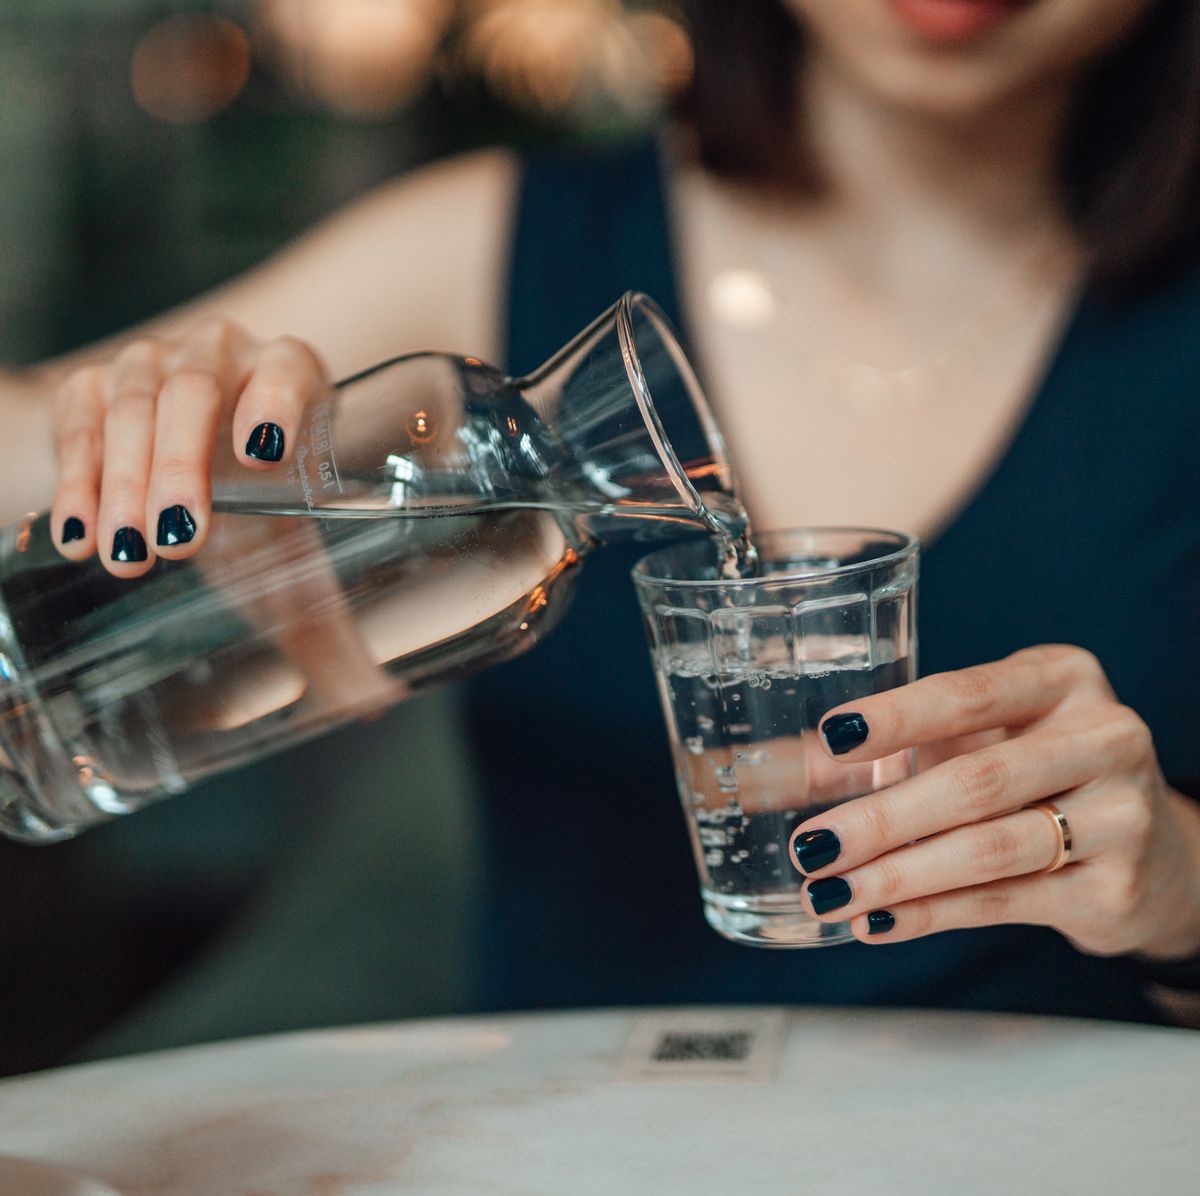 https://hips.hearstapps.com/hmg-prod/images/water-intake-per-day-how-many-glasses-of-water-should-we-drink-a-day-65807978e05aa.jpg?crop=0.669xw:1.00xh;0.0879xw,0&resize=1200:*